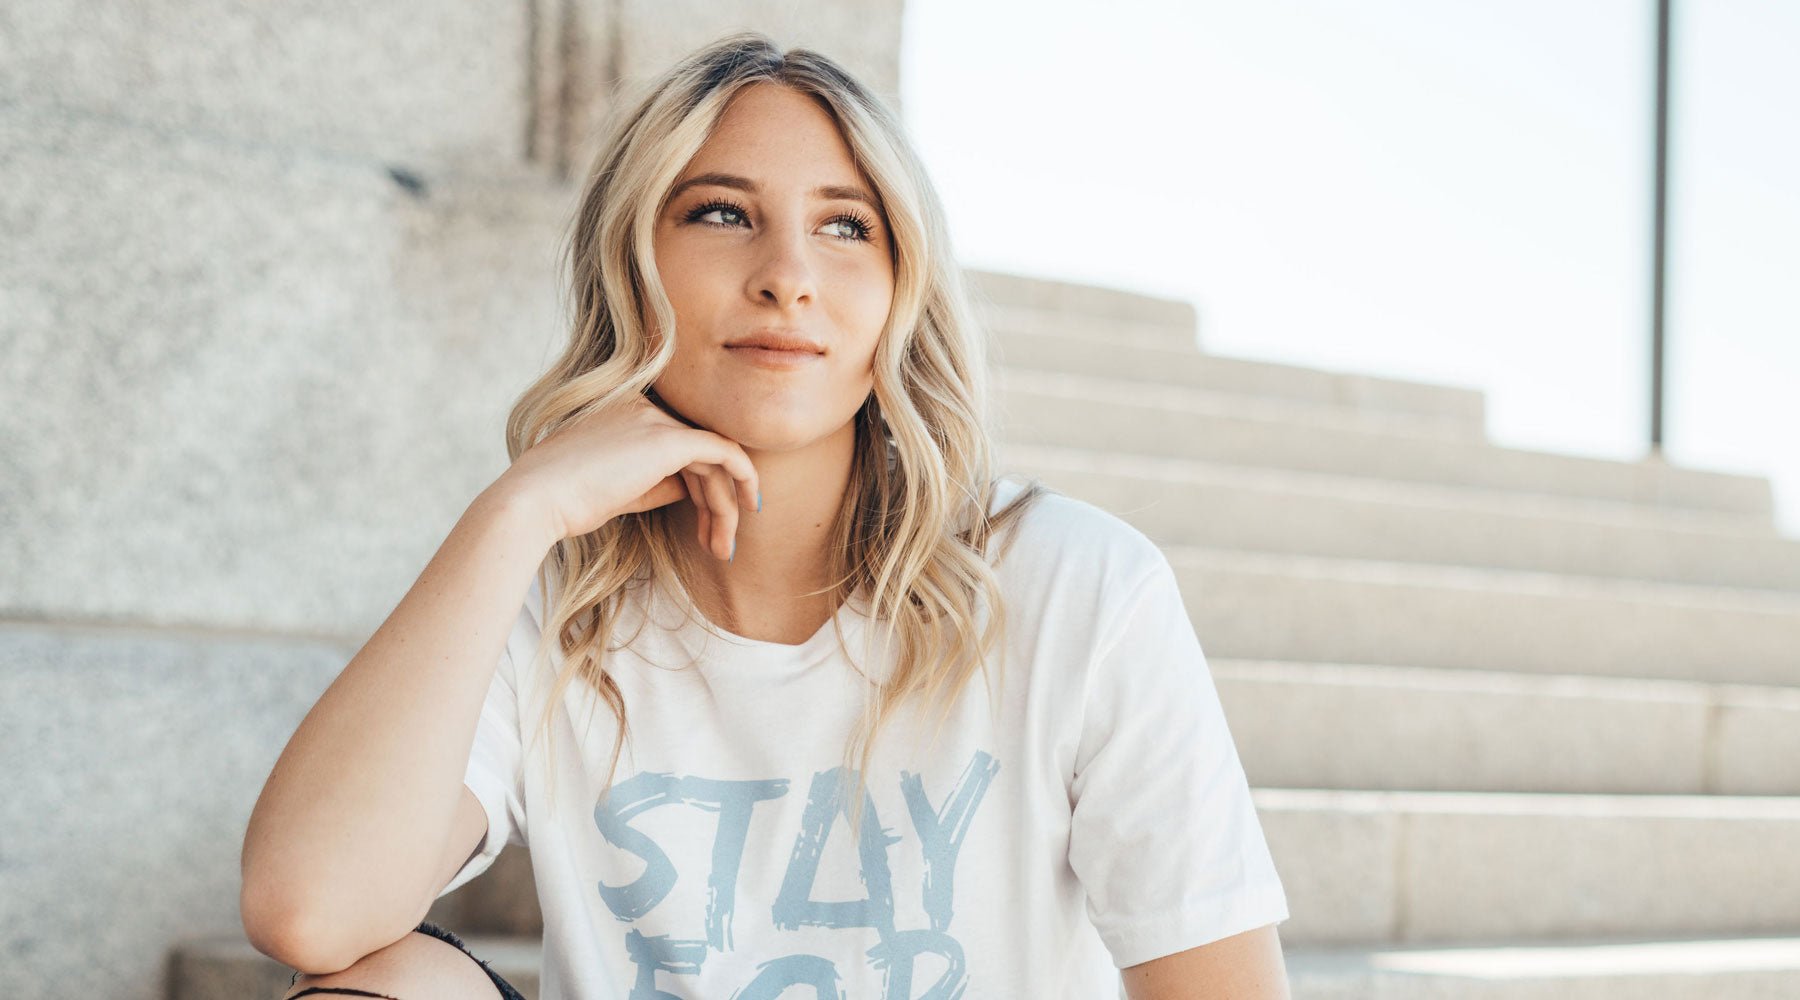 Helping Those Who Struggle With Mental Illness | STAY WEAR